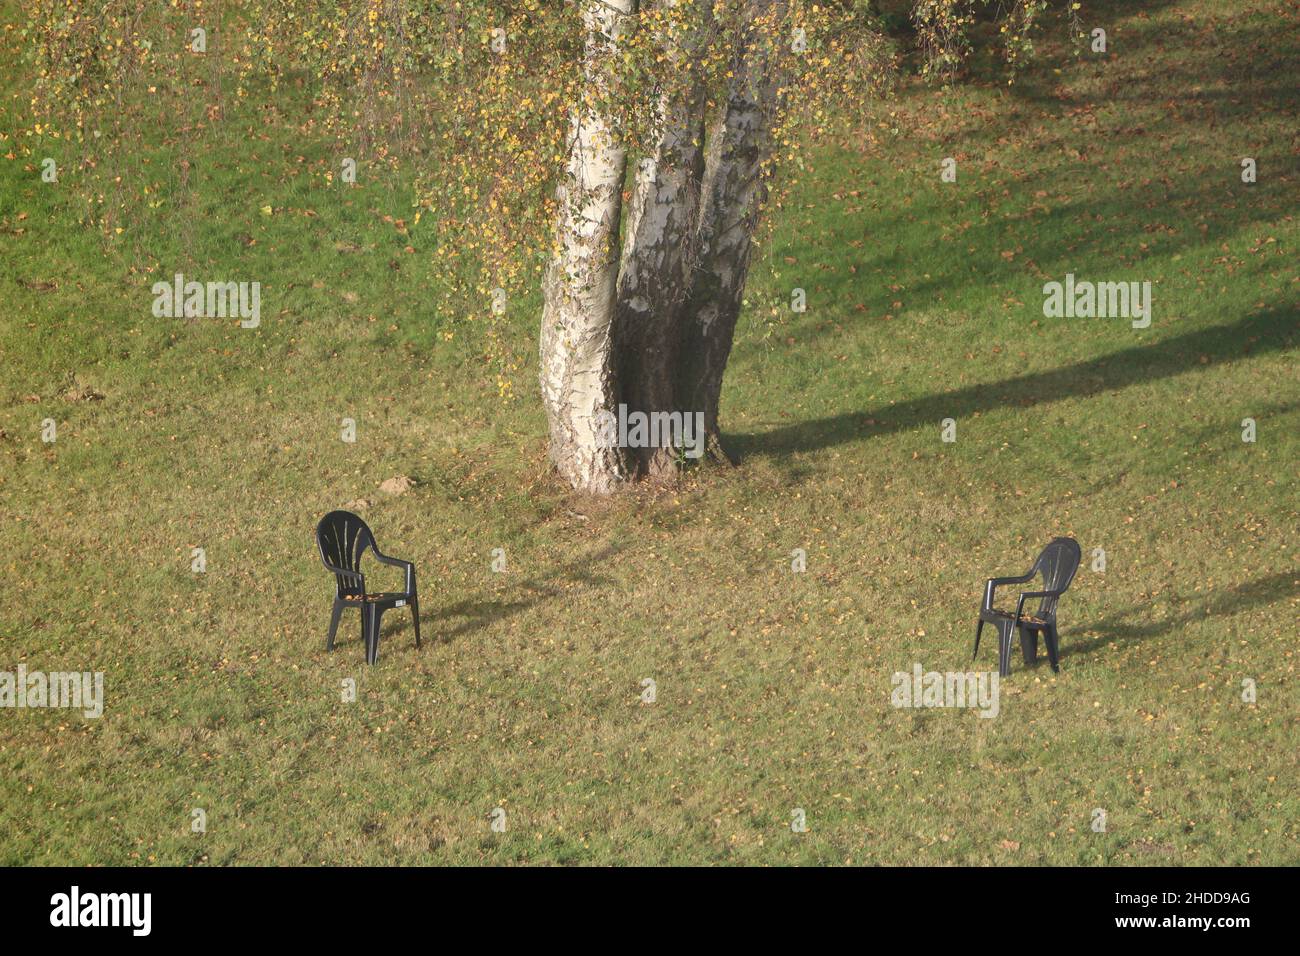 Aerial view of chairs on the lawn in the park Stock Photo